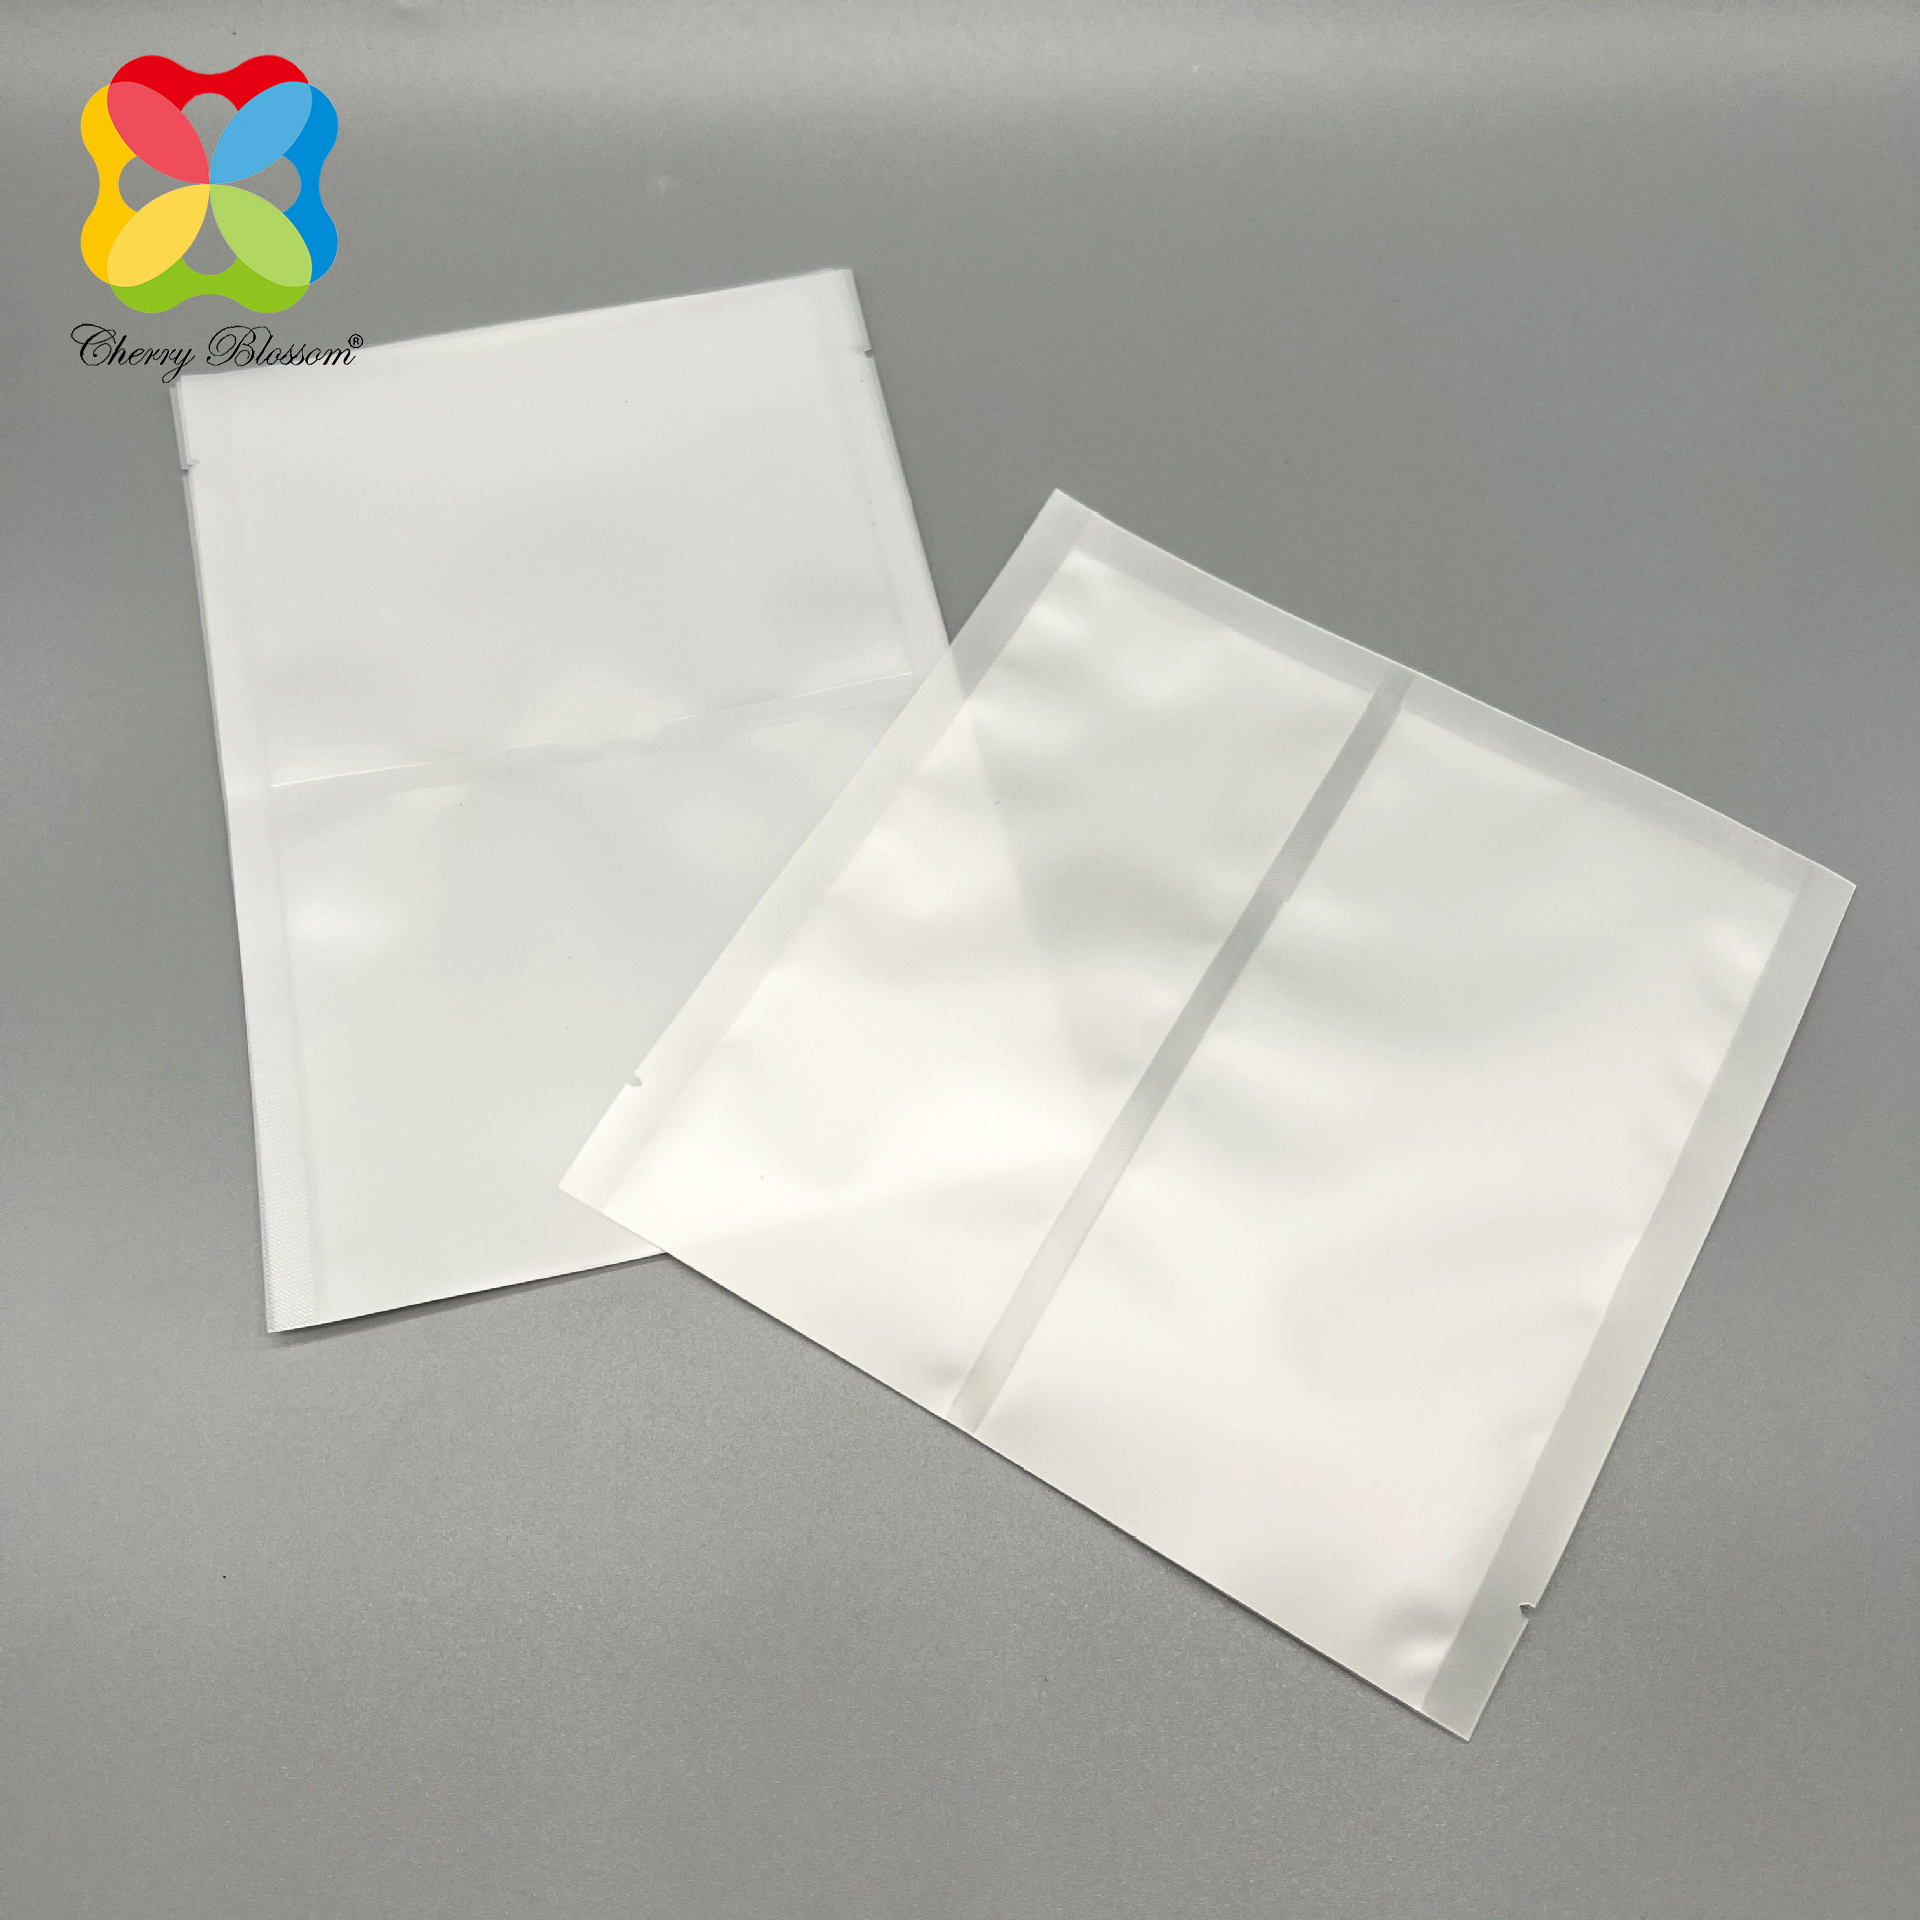 https://www.stblosom.com/custom-printed-two-in-one-dry-and-wet-separation-bag-food-packeasing-product/